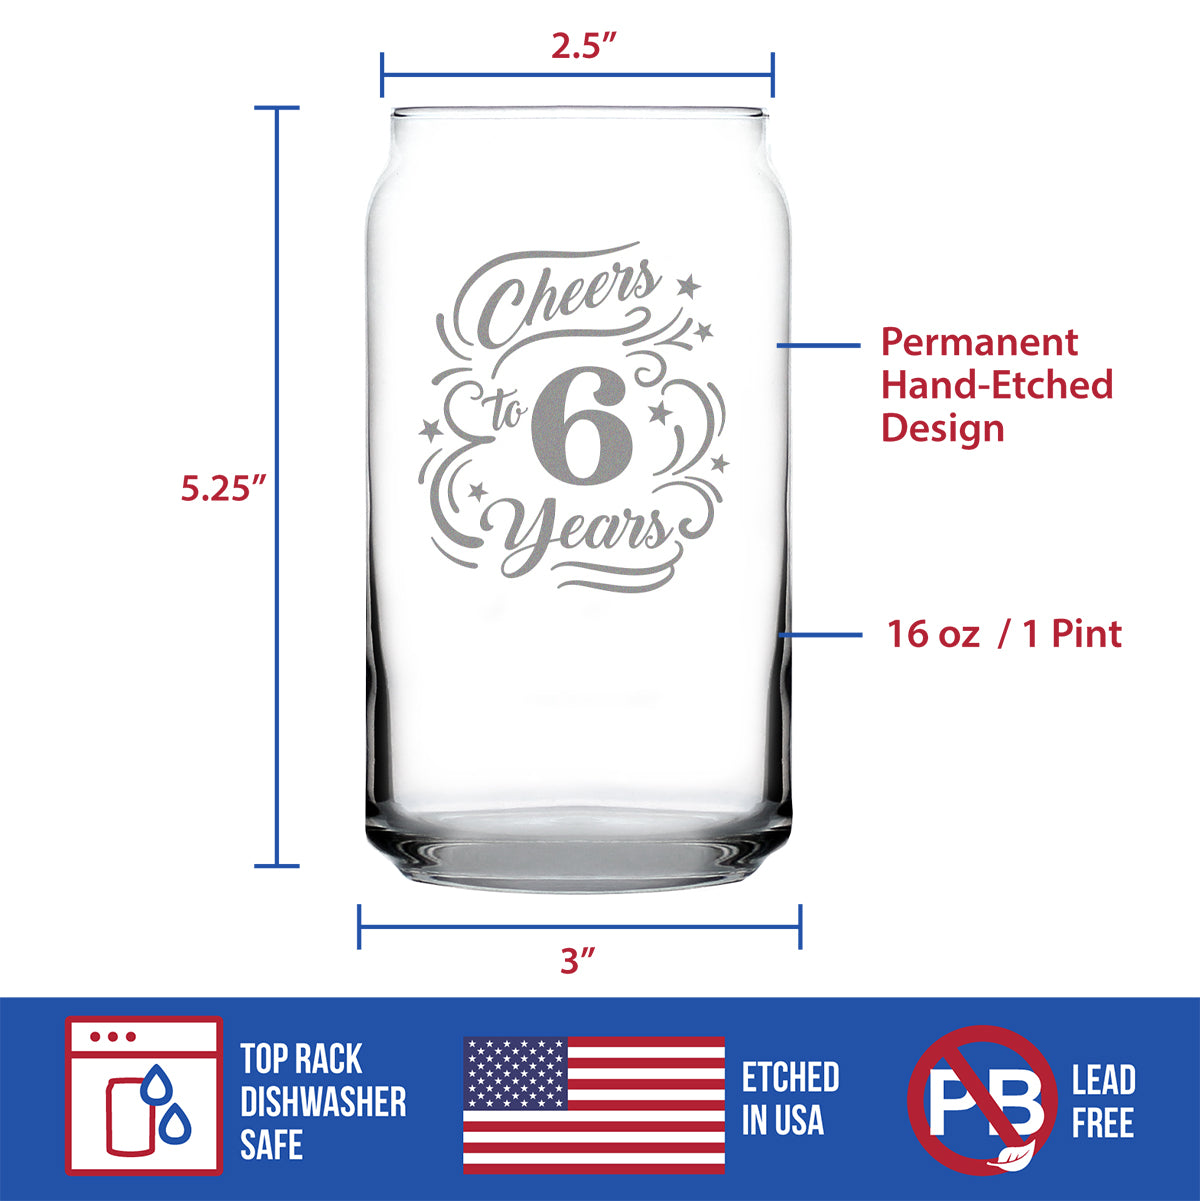 Cheers to 6 Years - Beer Can Pint Glass Gifts for Women & Men